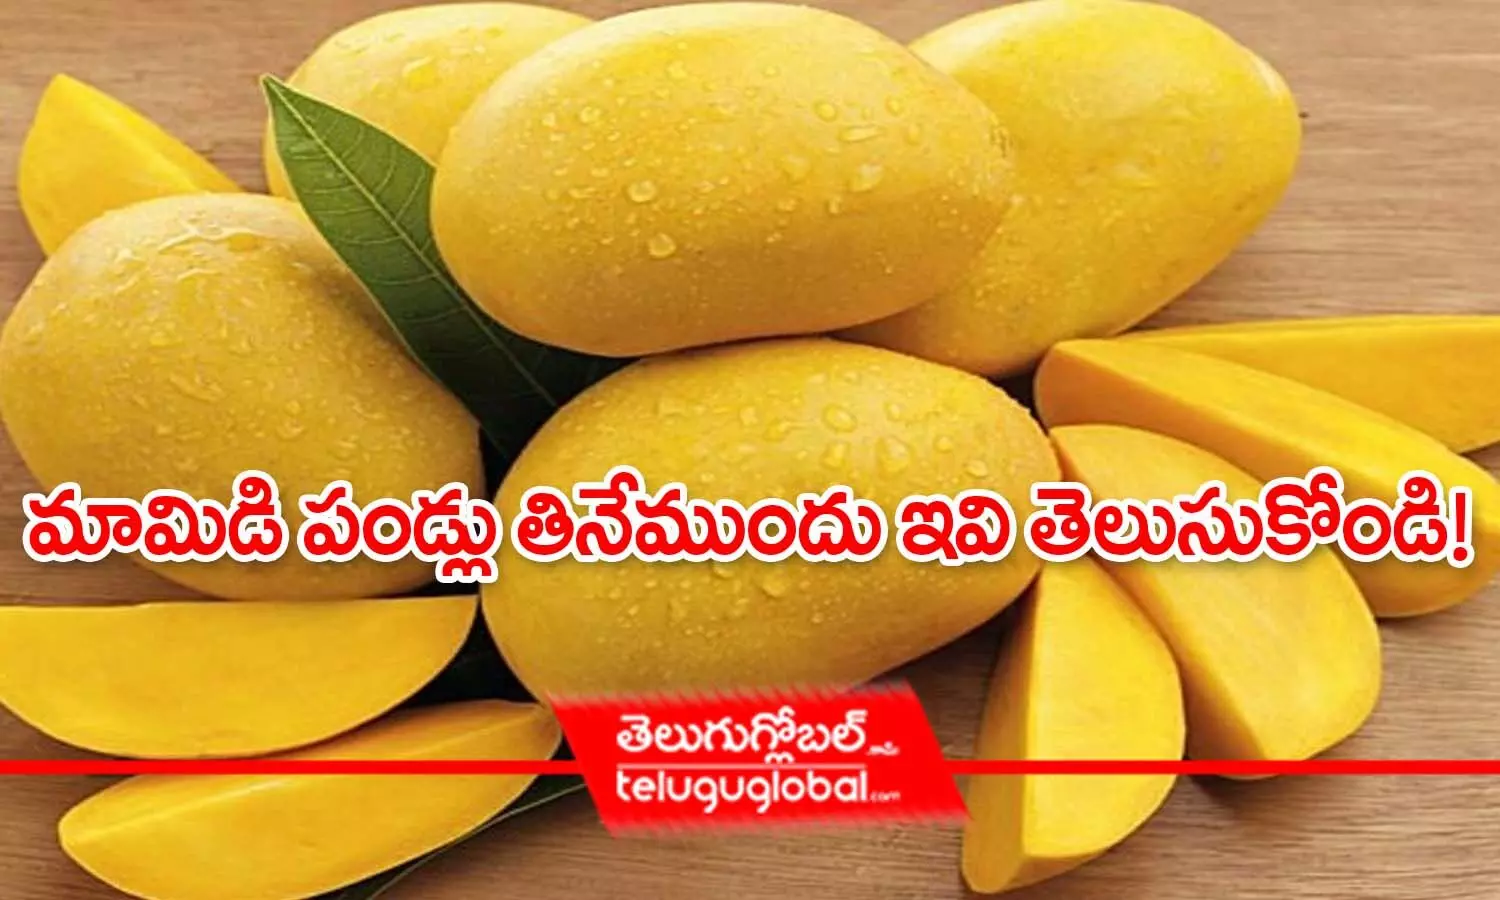 Why mangoes are soaked before eating